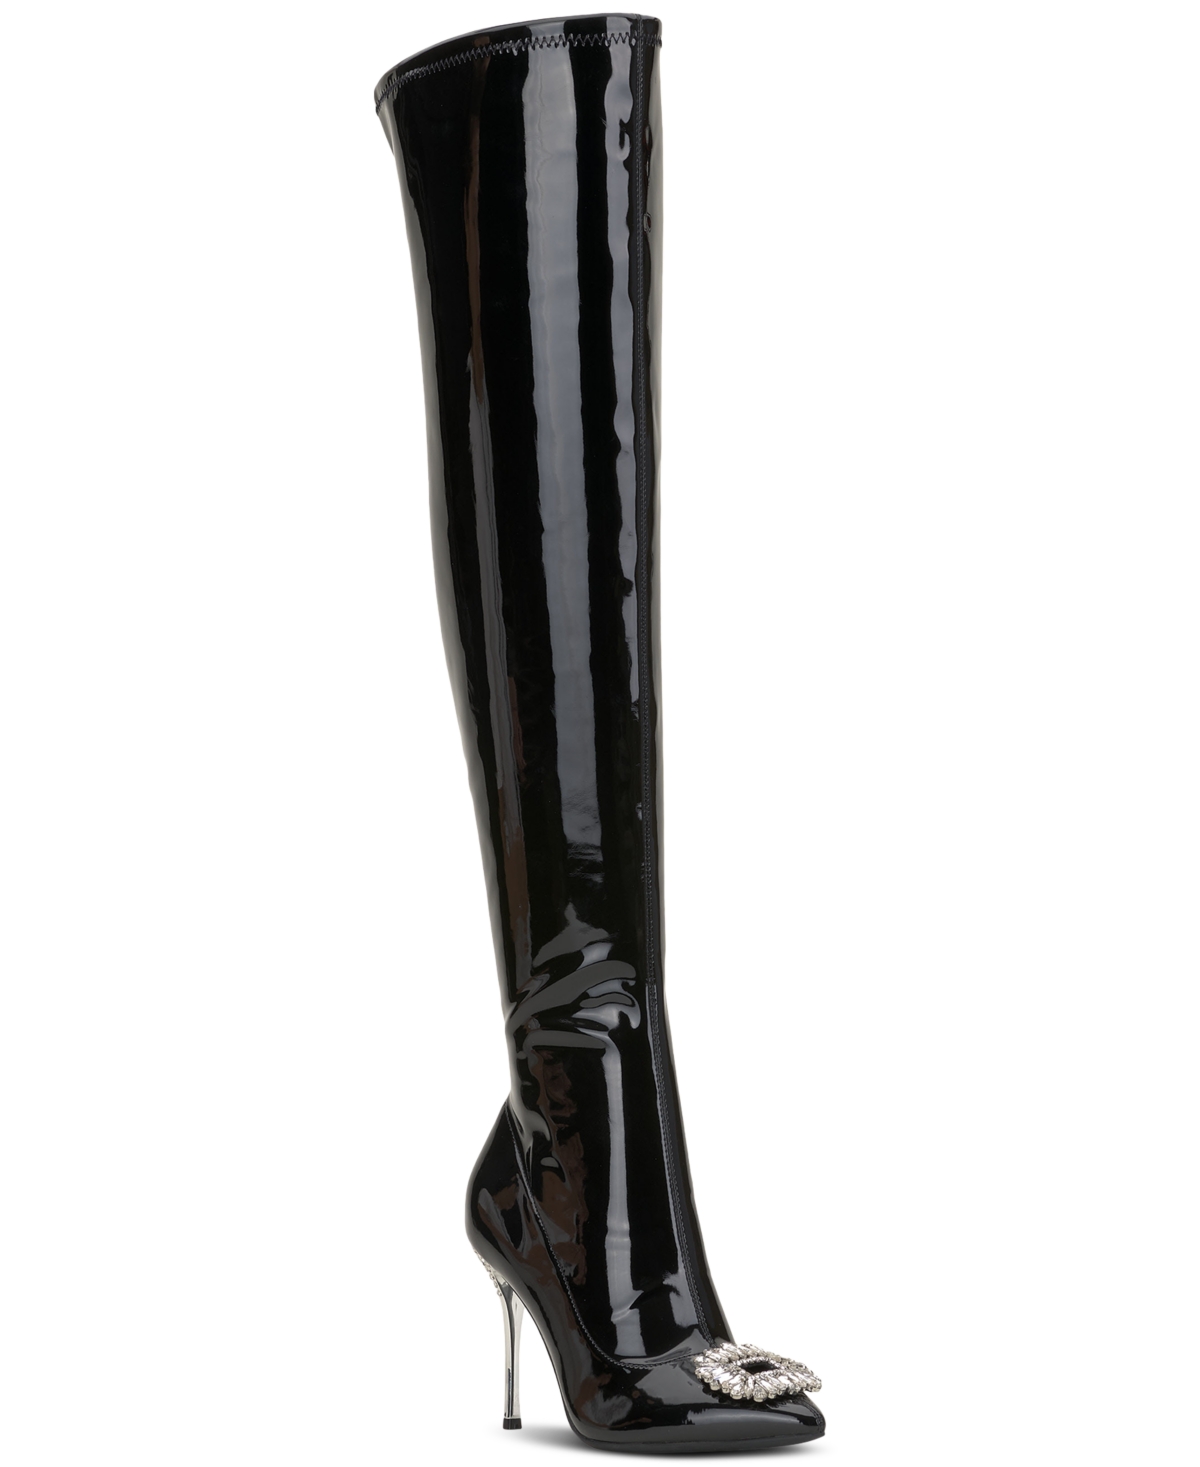 Women's Romina Embellished Pointed-Toe Over-The-Knee Boots, Created for Macy's - Black Patent